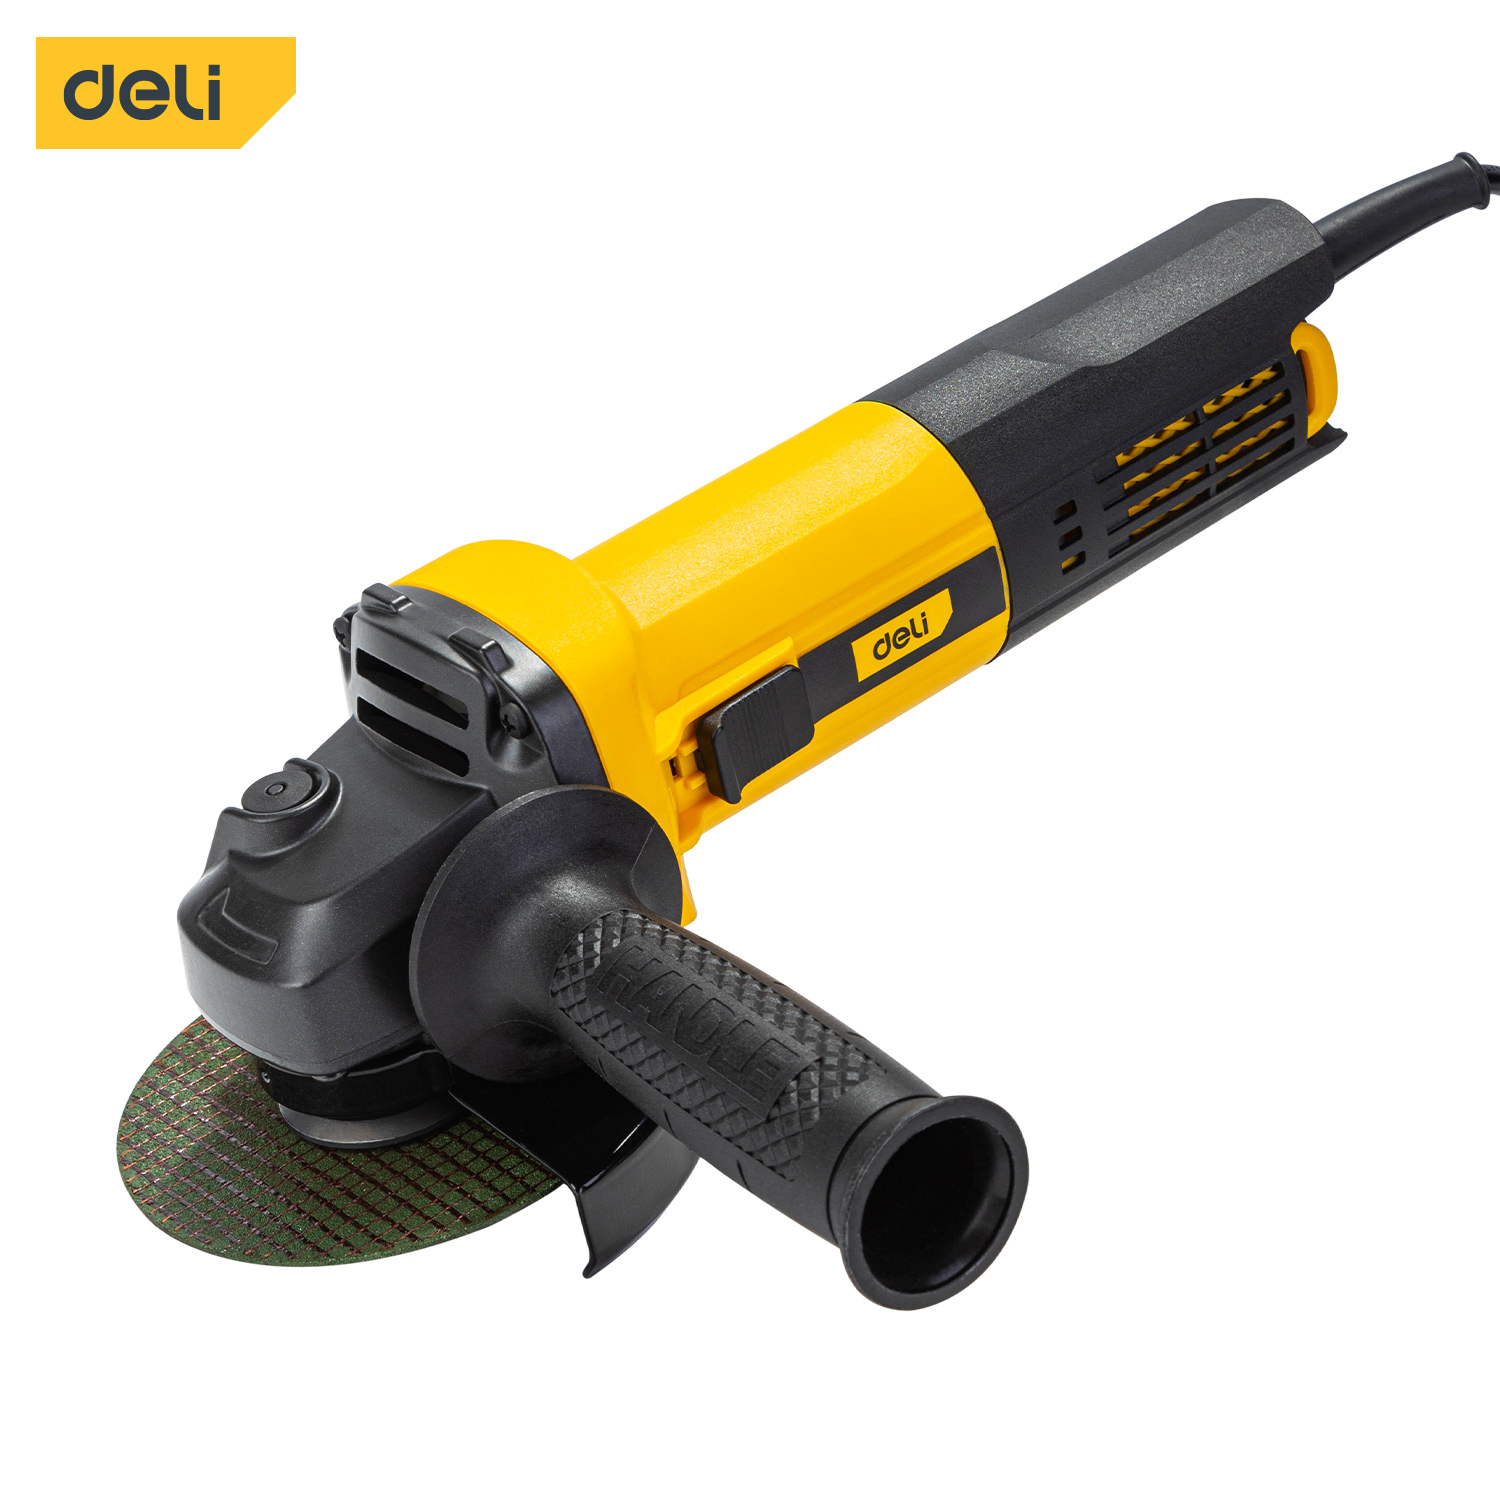 Long Neck Quiet Angle Grinder For Cutting